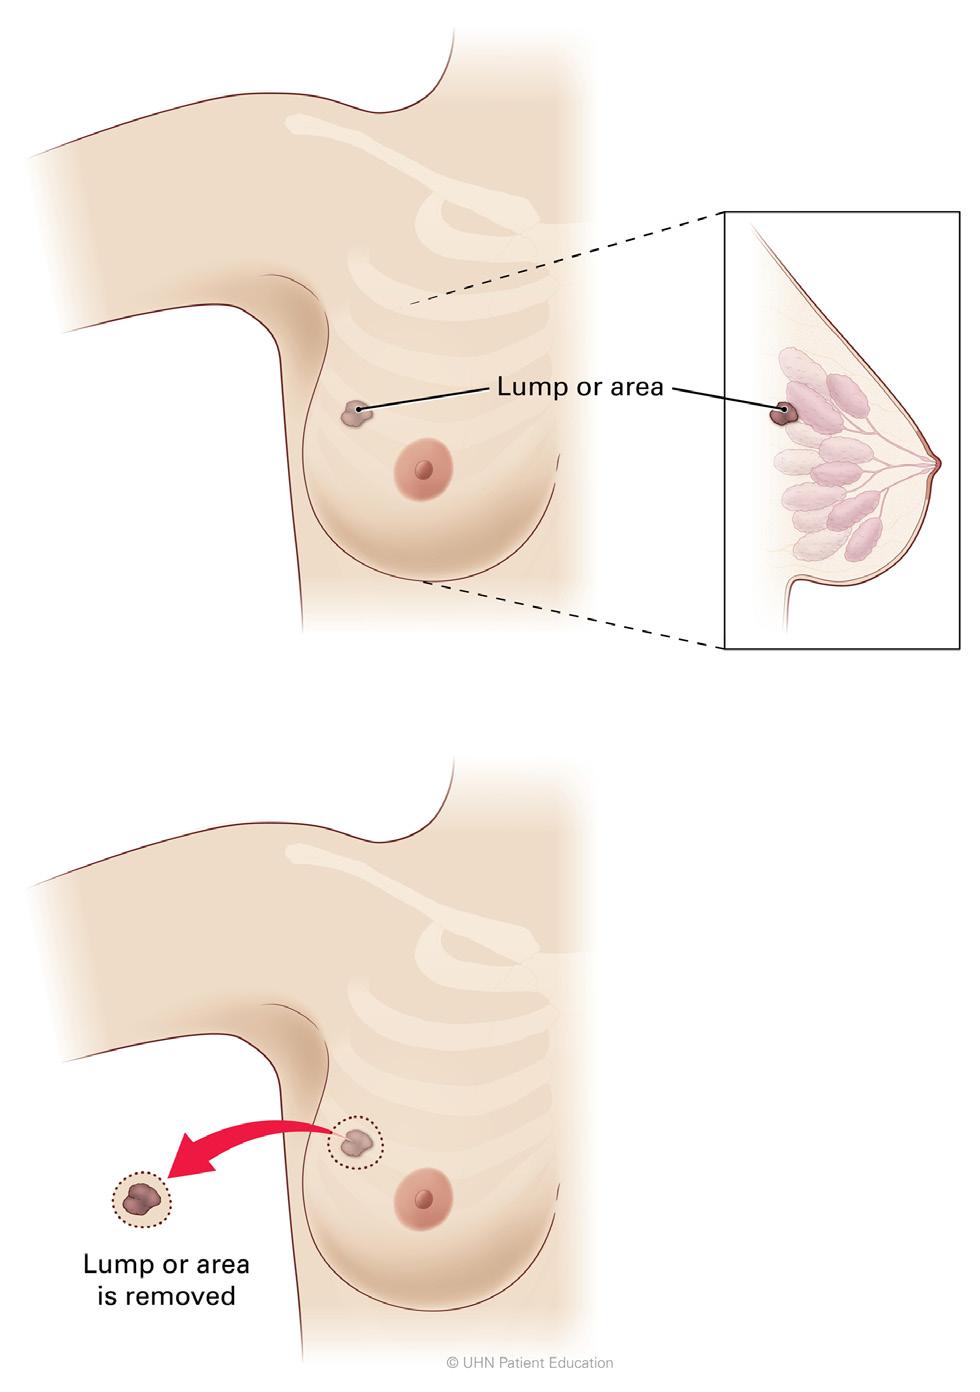 What is a lumpectomy? A lumpectomy is surgery to remove a lump in the breast, and some breast tissue around it. The amount of breast tissue removed depends on the size of the lump.